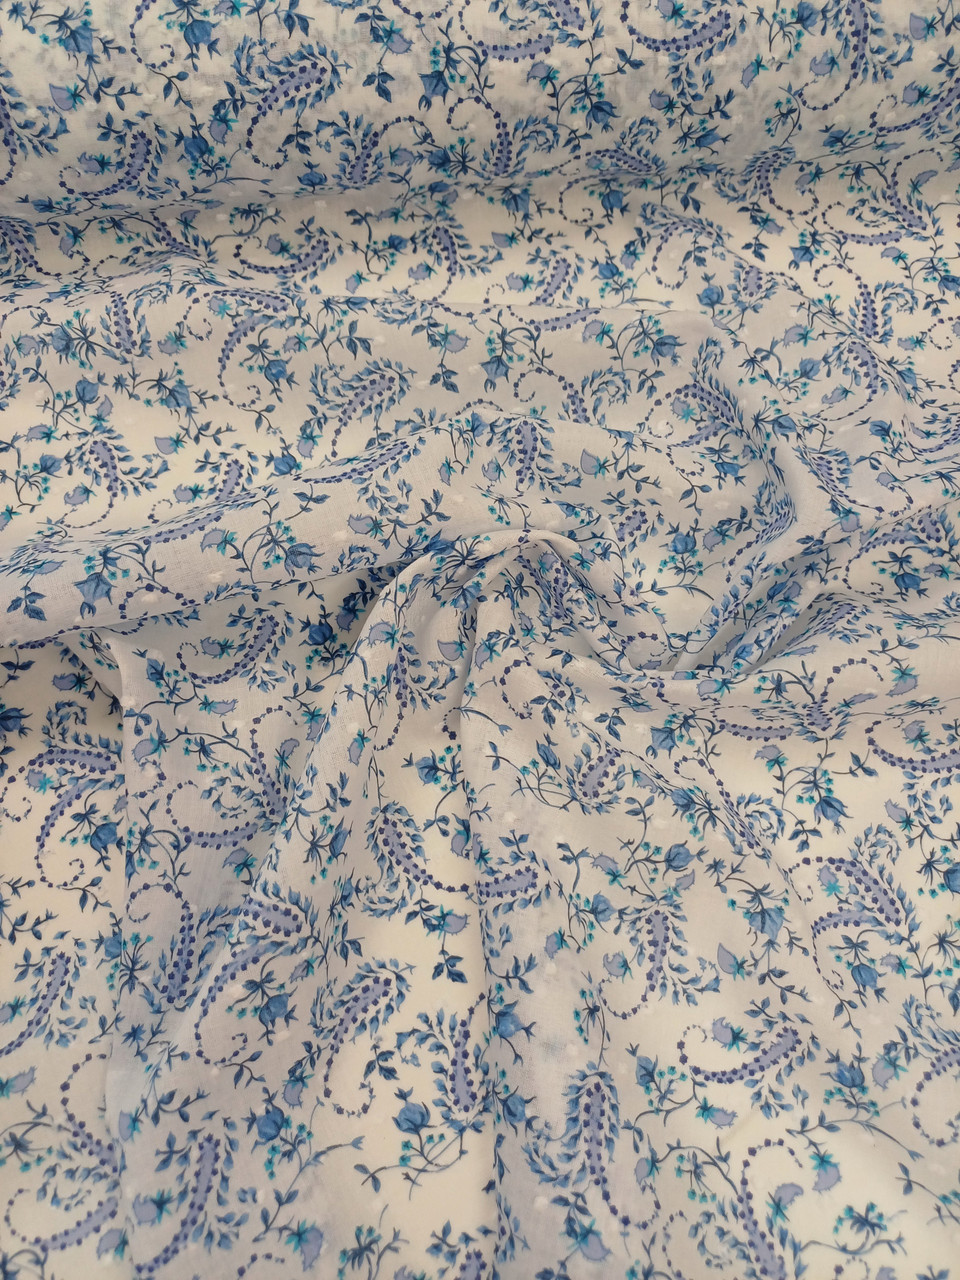 A really pretty floral print cotton, Almost a paisley design in blue and white, 100% cotton, 140 cm wide, Wash at 30 degrees, Ideal for shirts, dresses and more, Priced per metre 